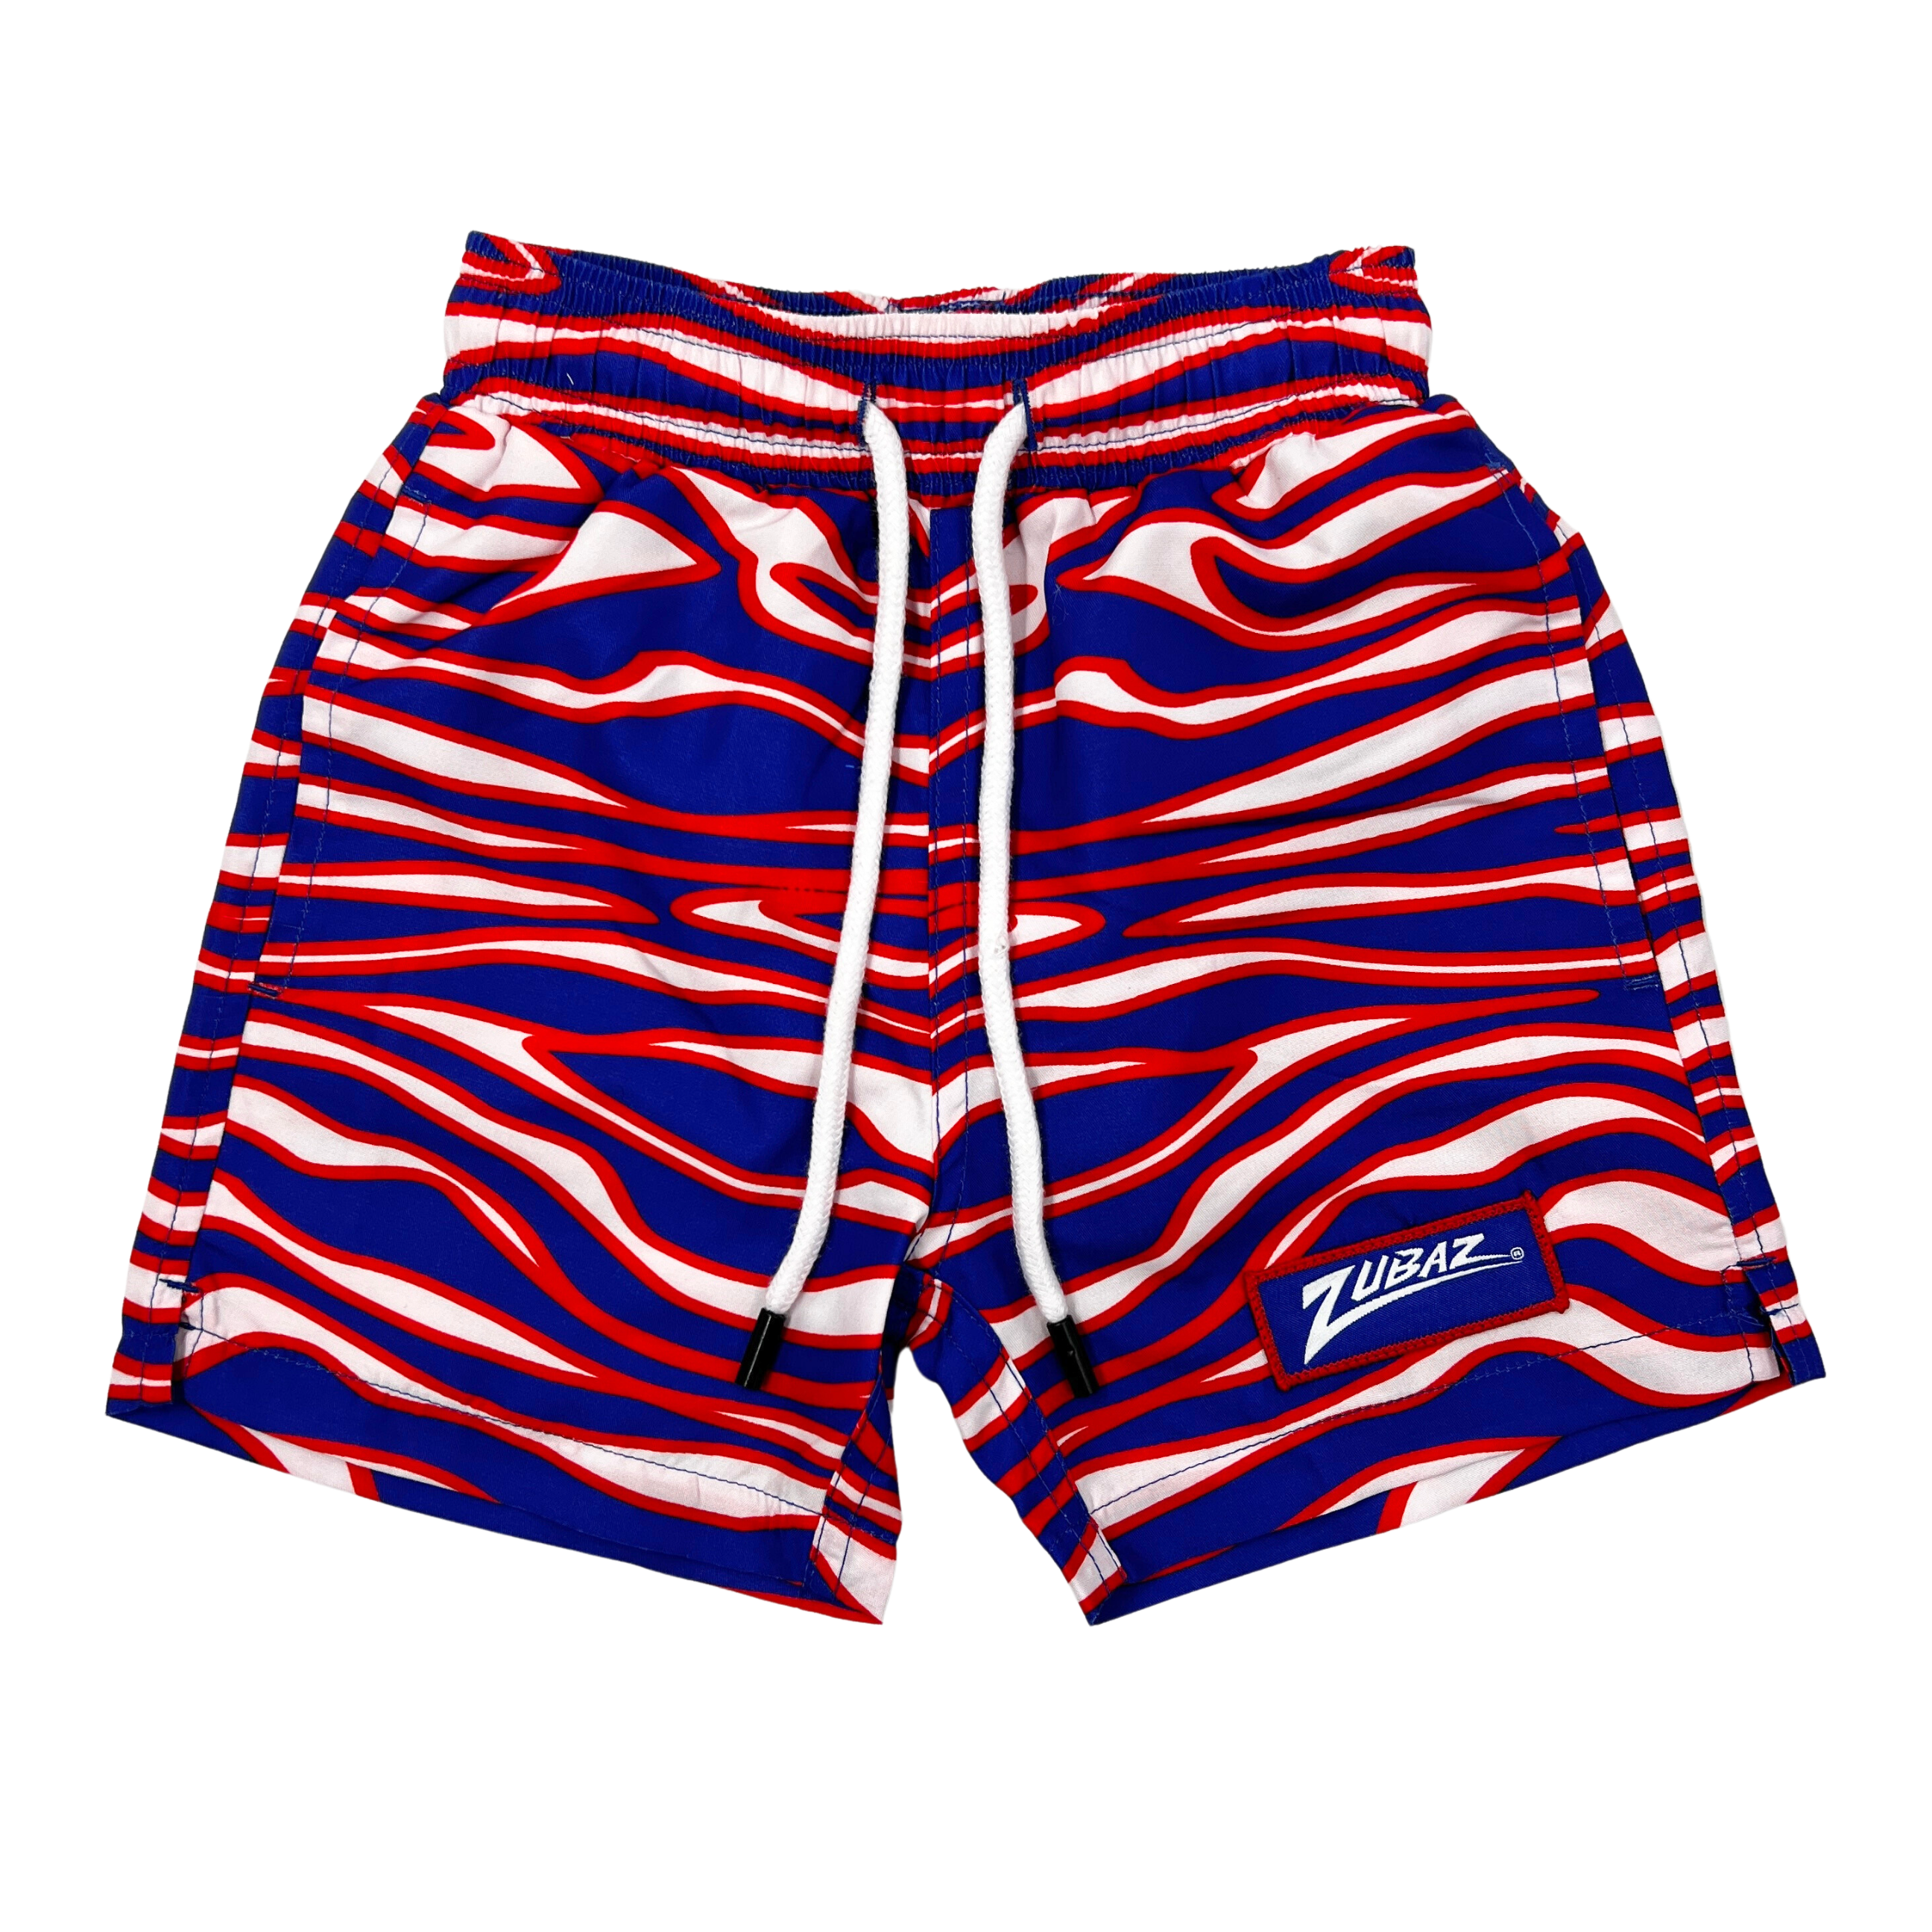 OAS Puzzle Swim Shorts in Blue - Size S